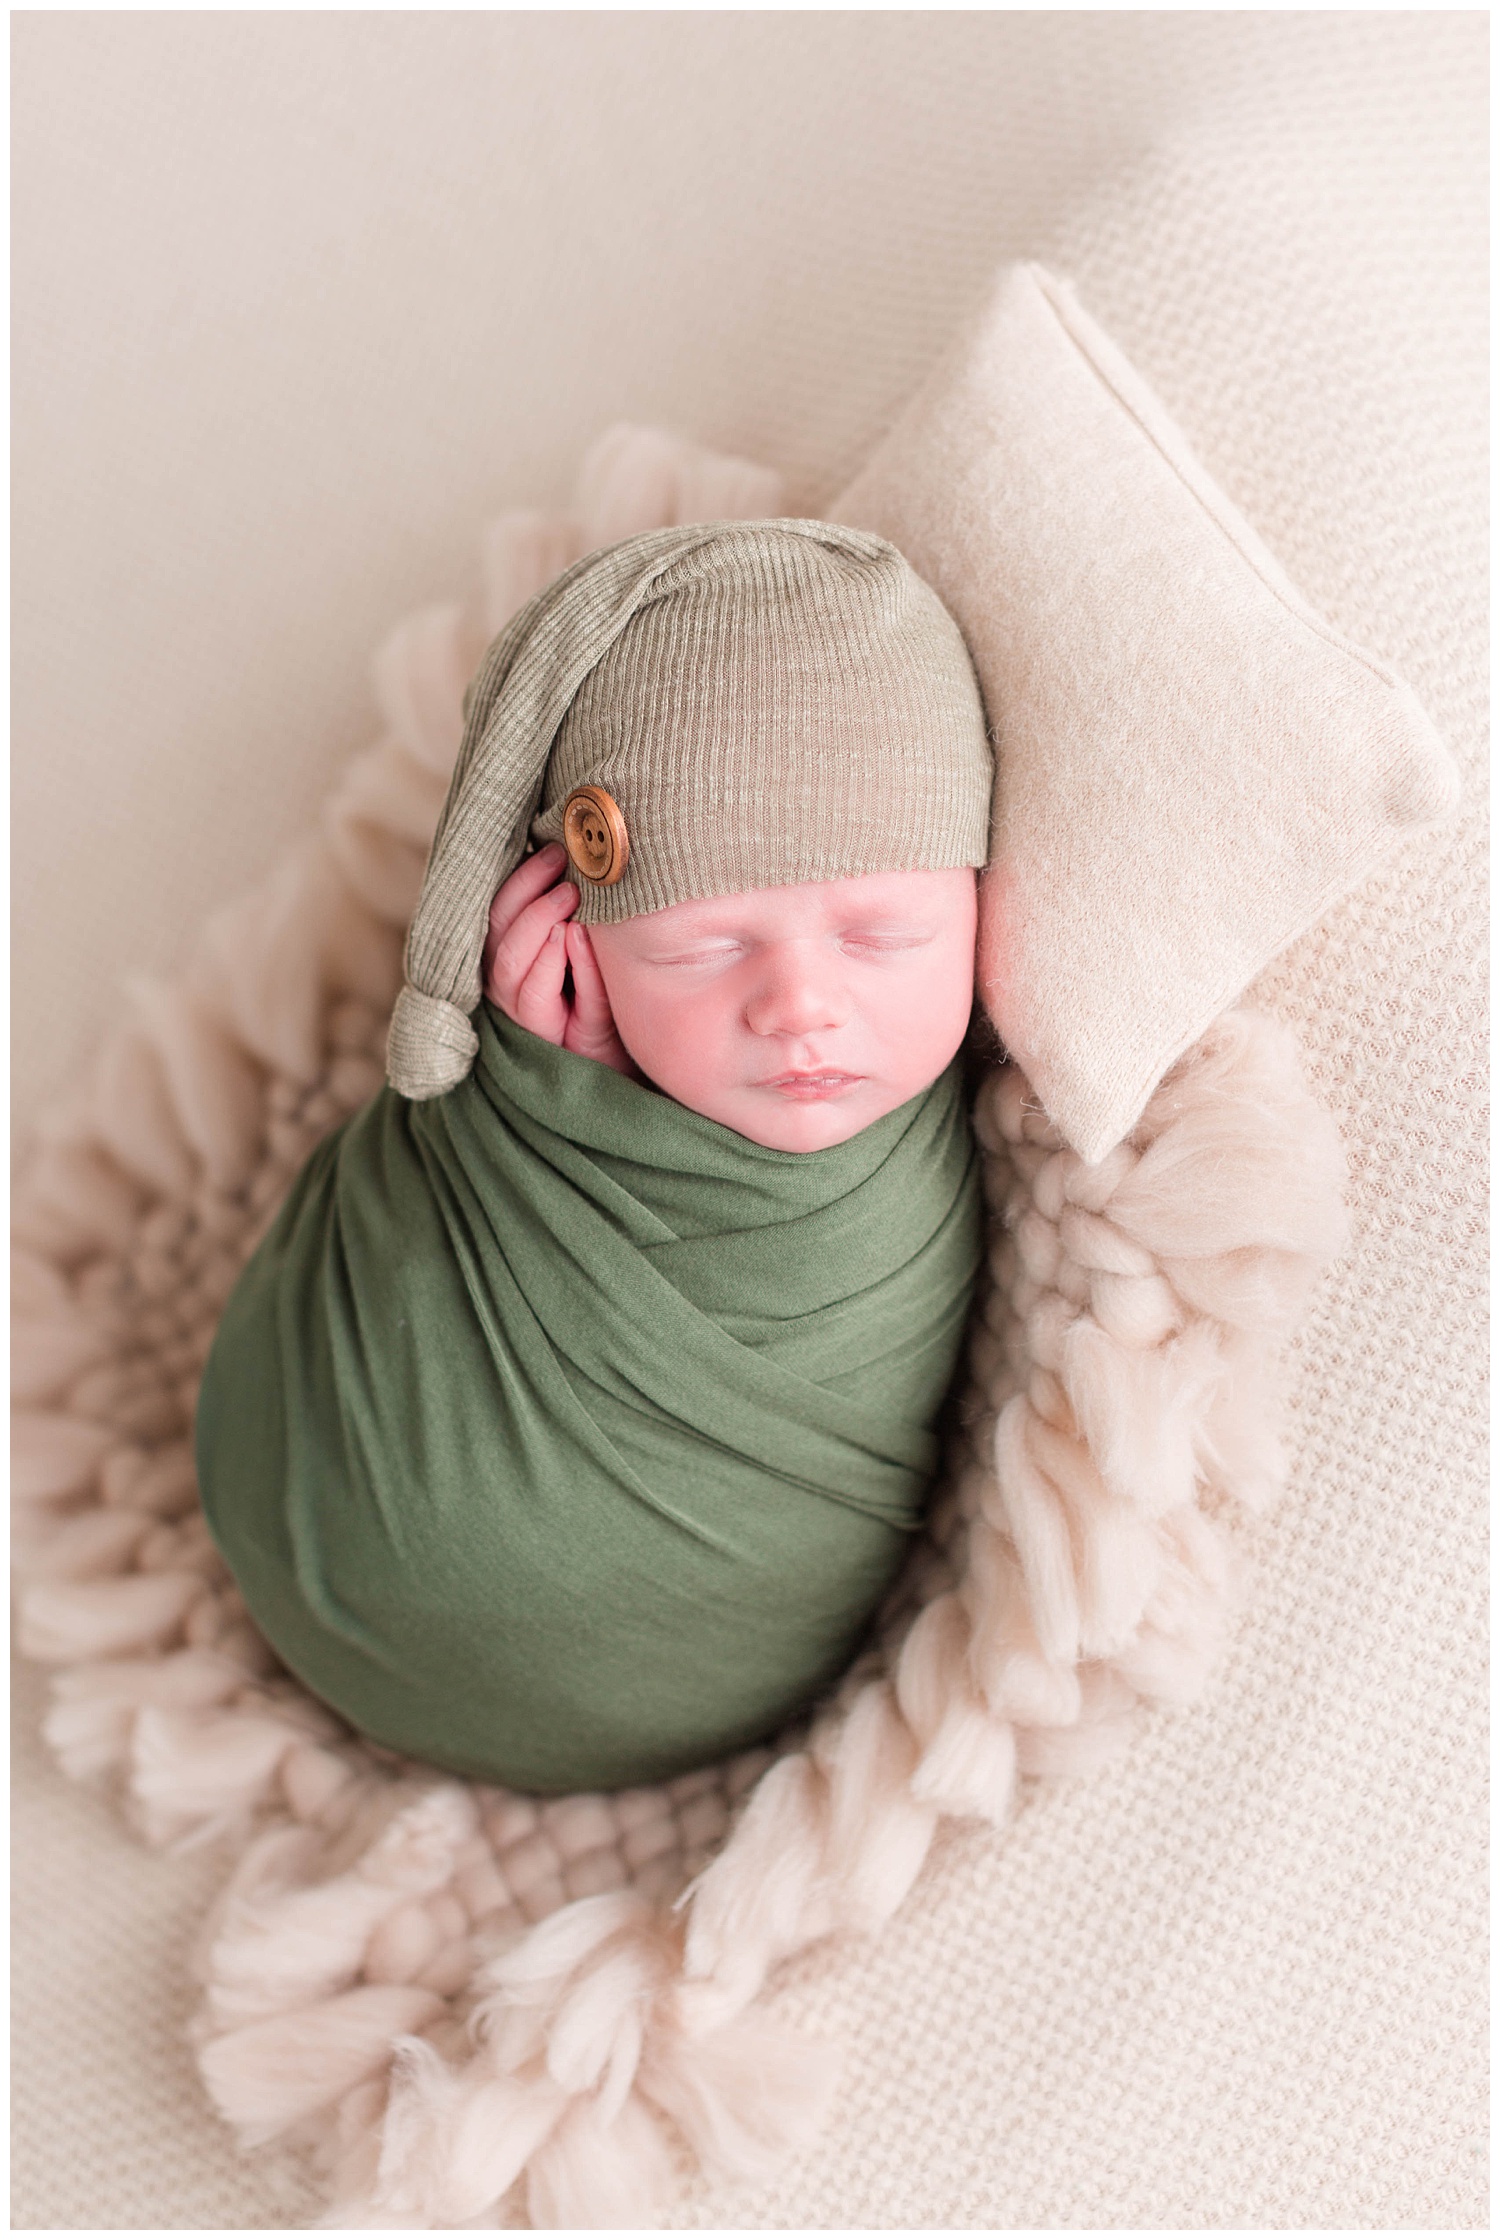 Newborn baby boy wrapped in a green swaddle wearing a green night cap with his hands gently folded along his cheek. | CB Studio